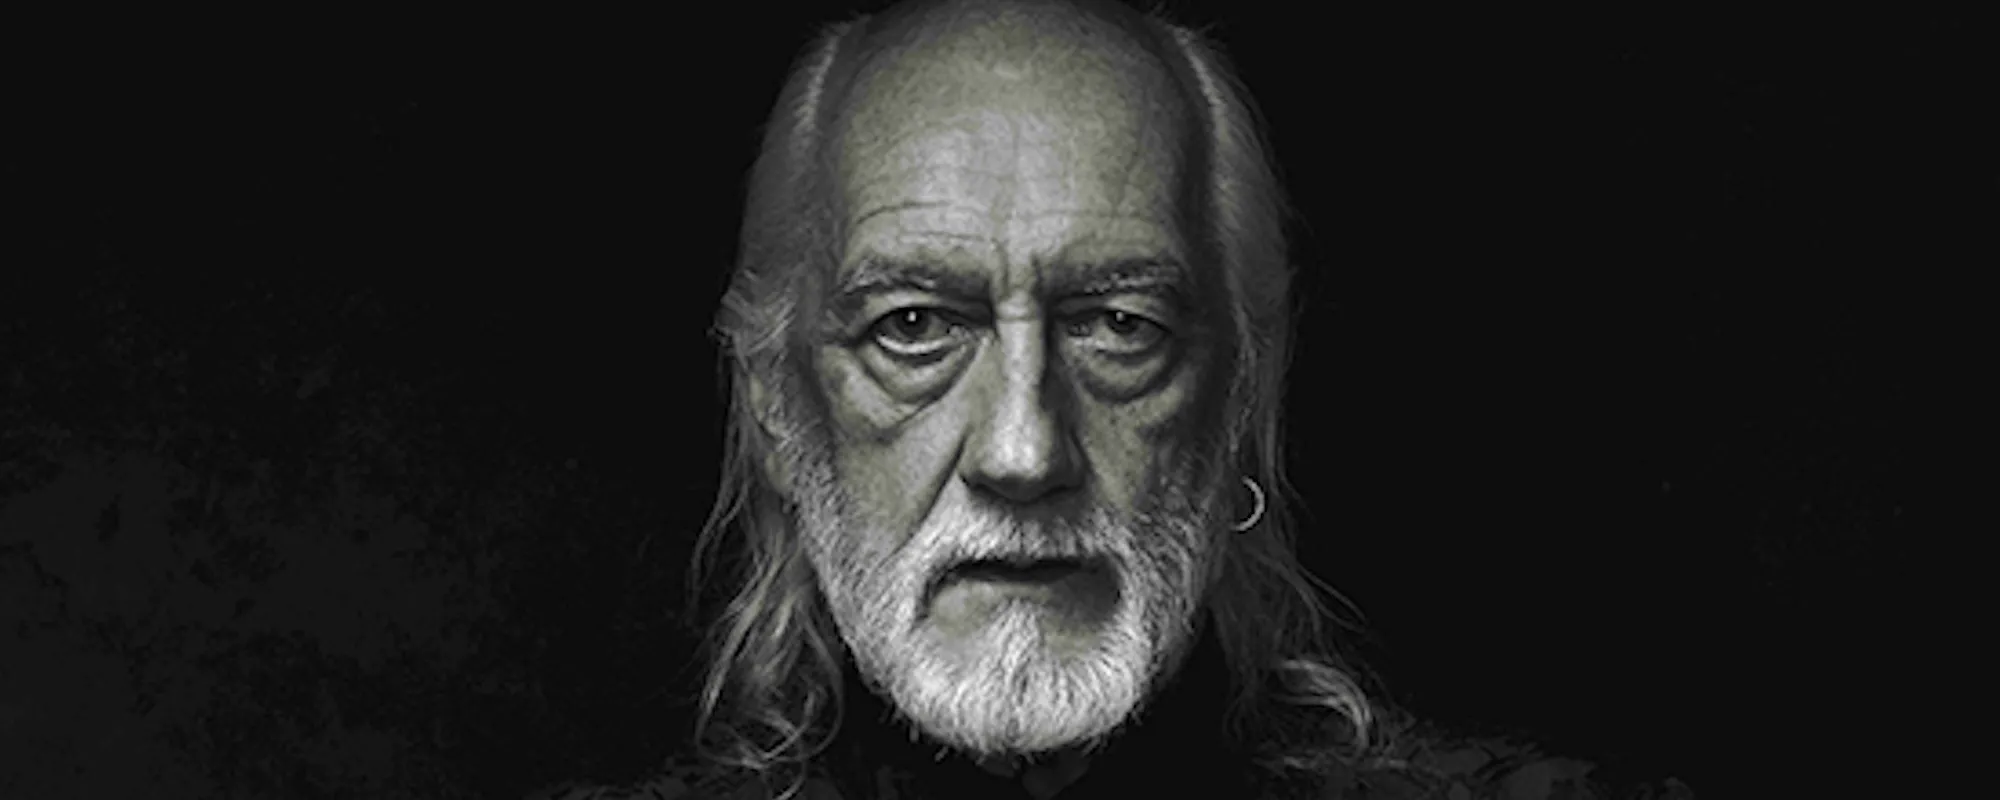 Mick Fleetwood Reveals the Future of Fleetwood Mac is “Sort of Unthinkable Right Now”